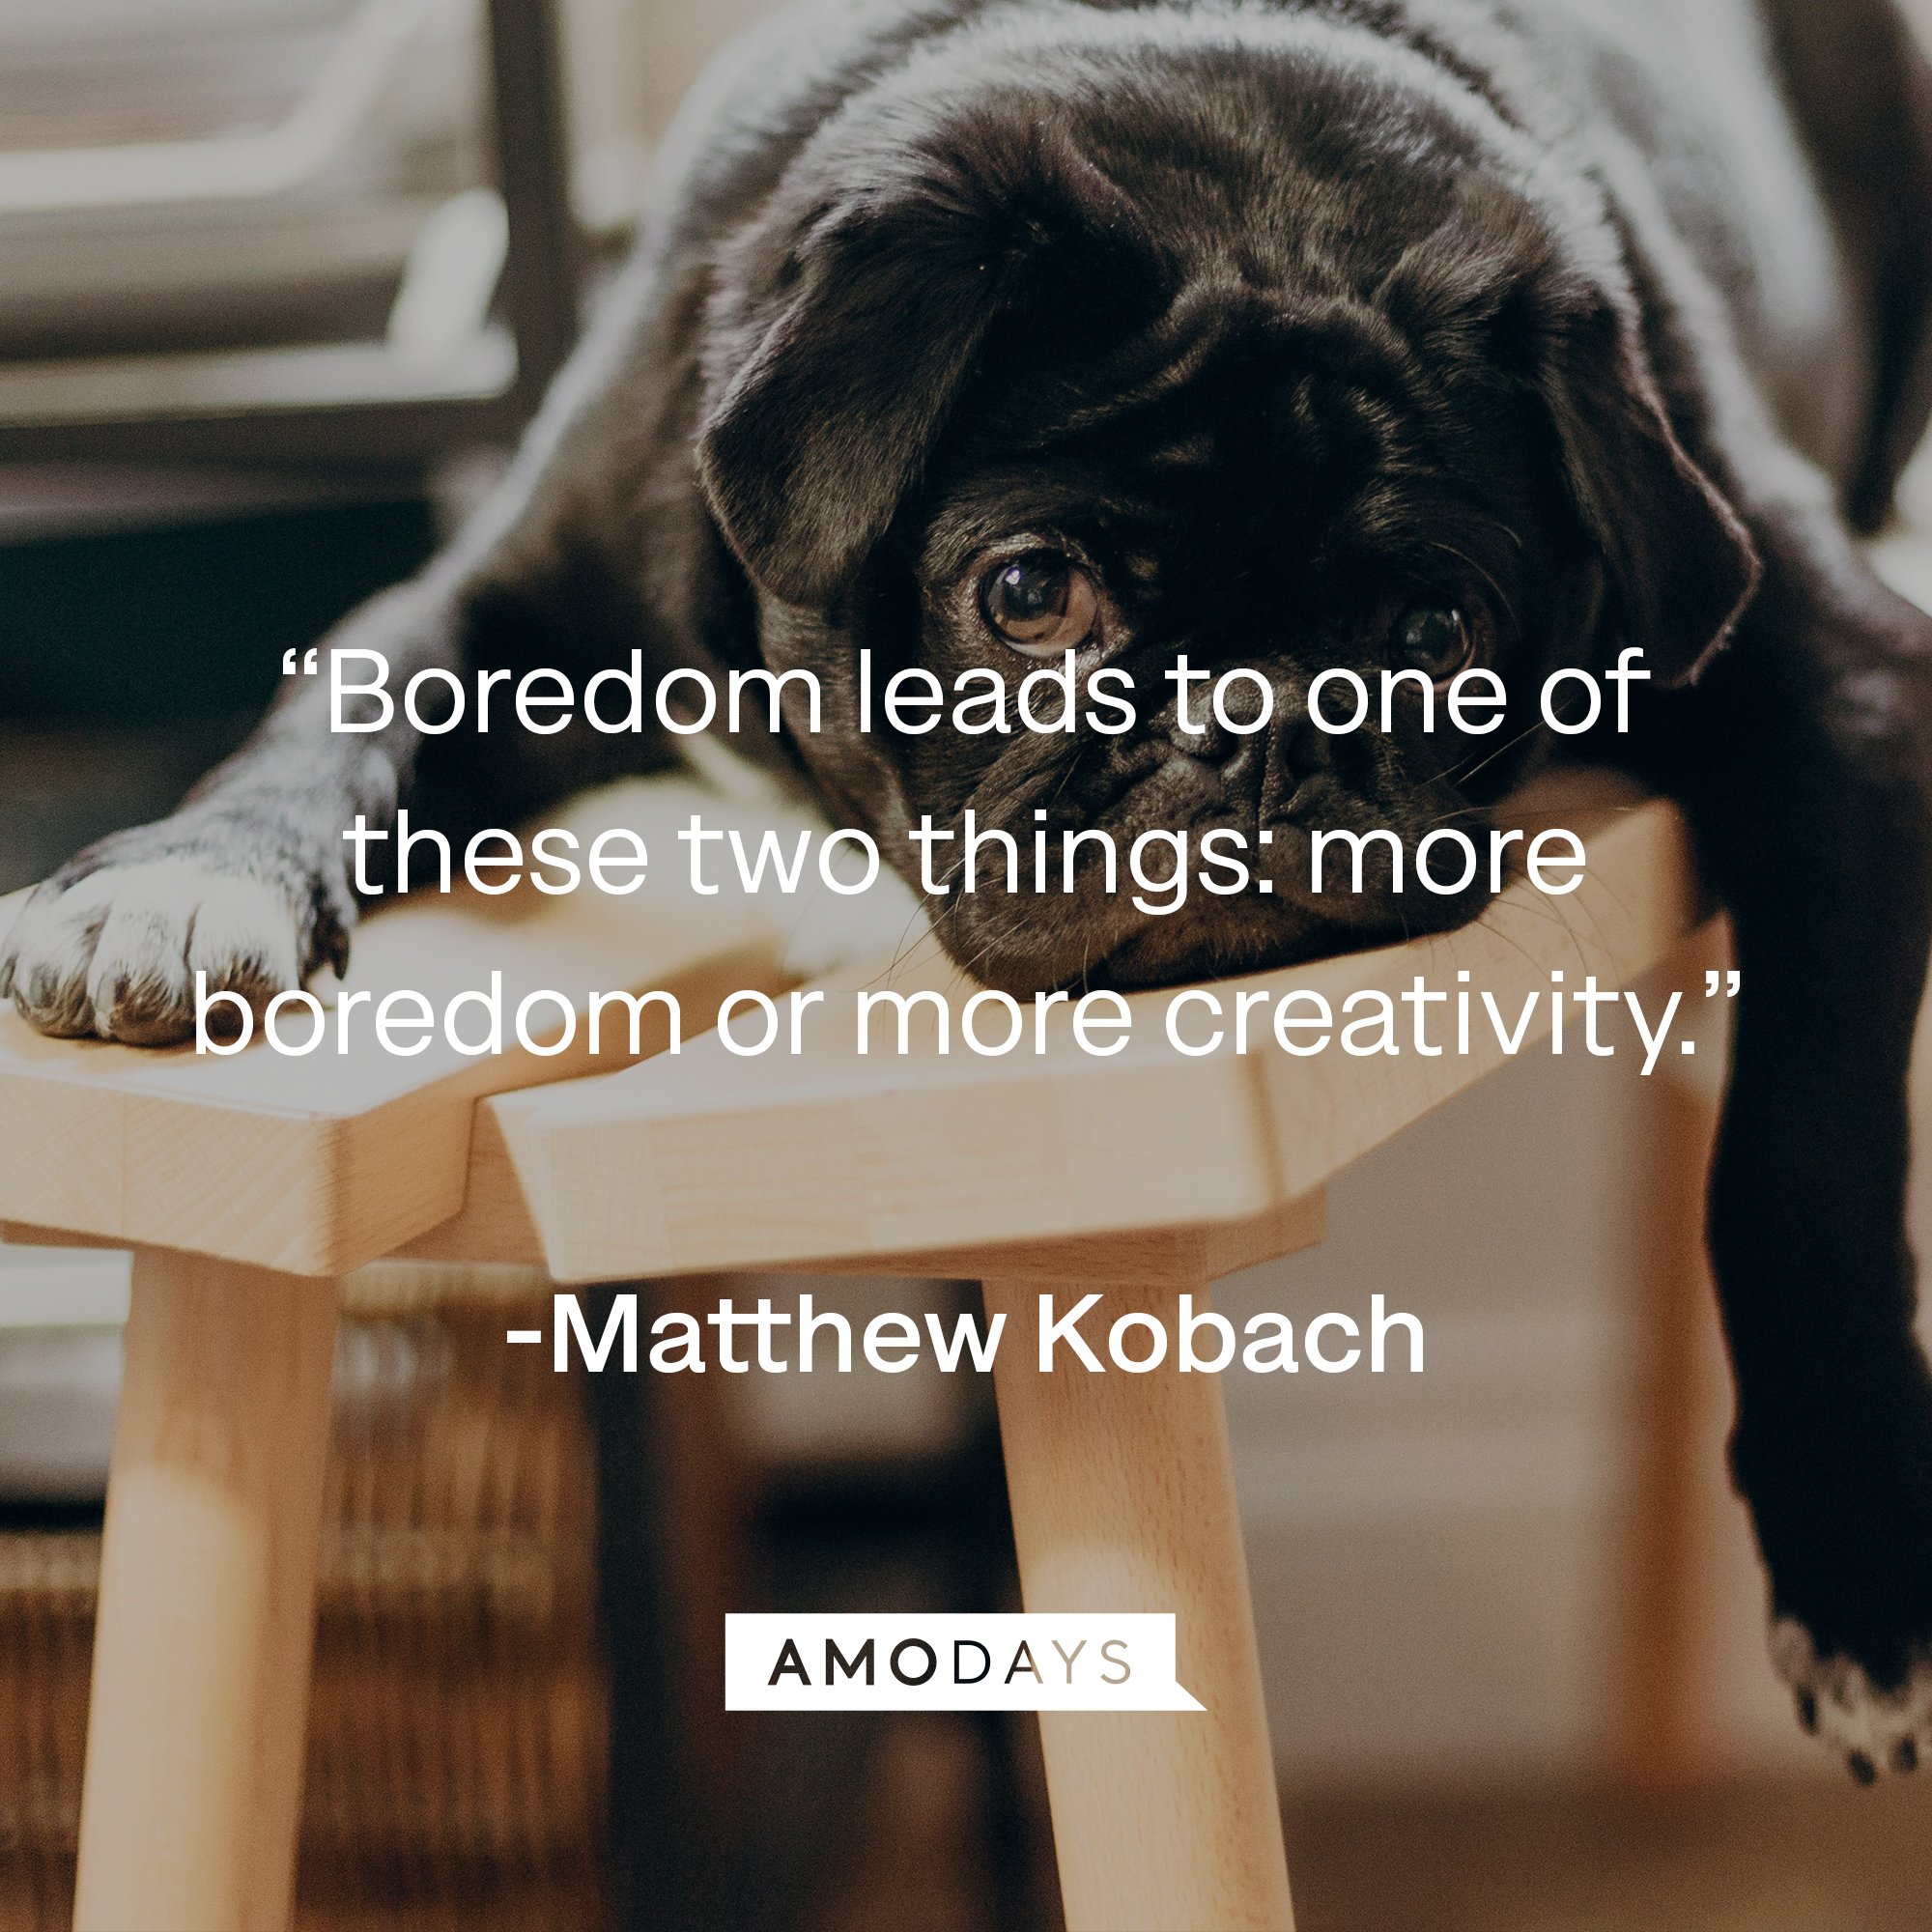  Matthew KobachImage's quote: “Boredom leads to one of these two things: more boredom or more creativity.” | Image: AmoDays